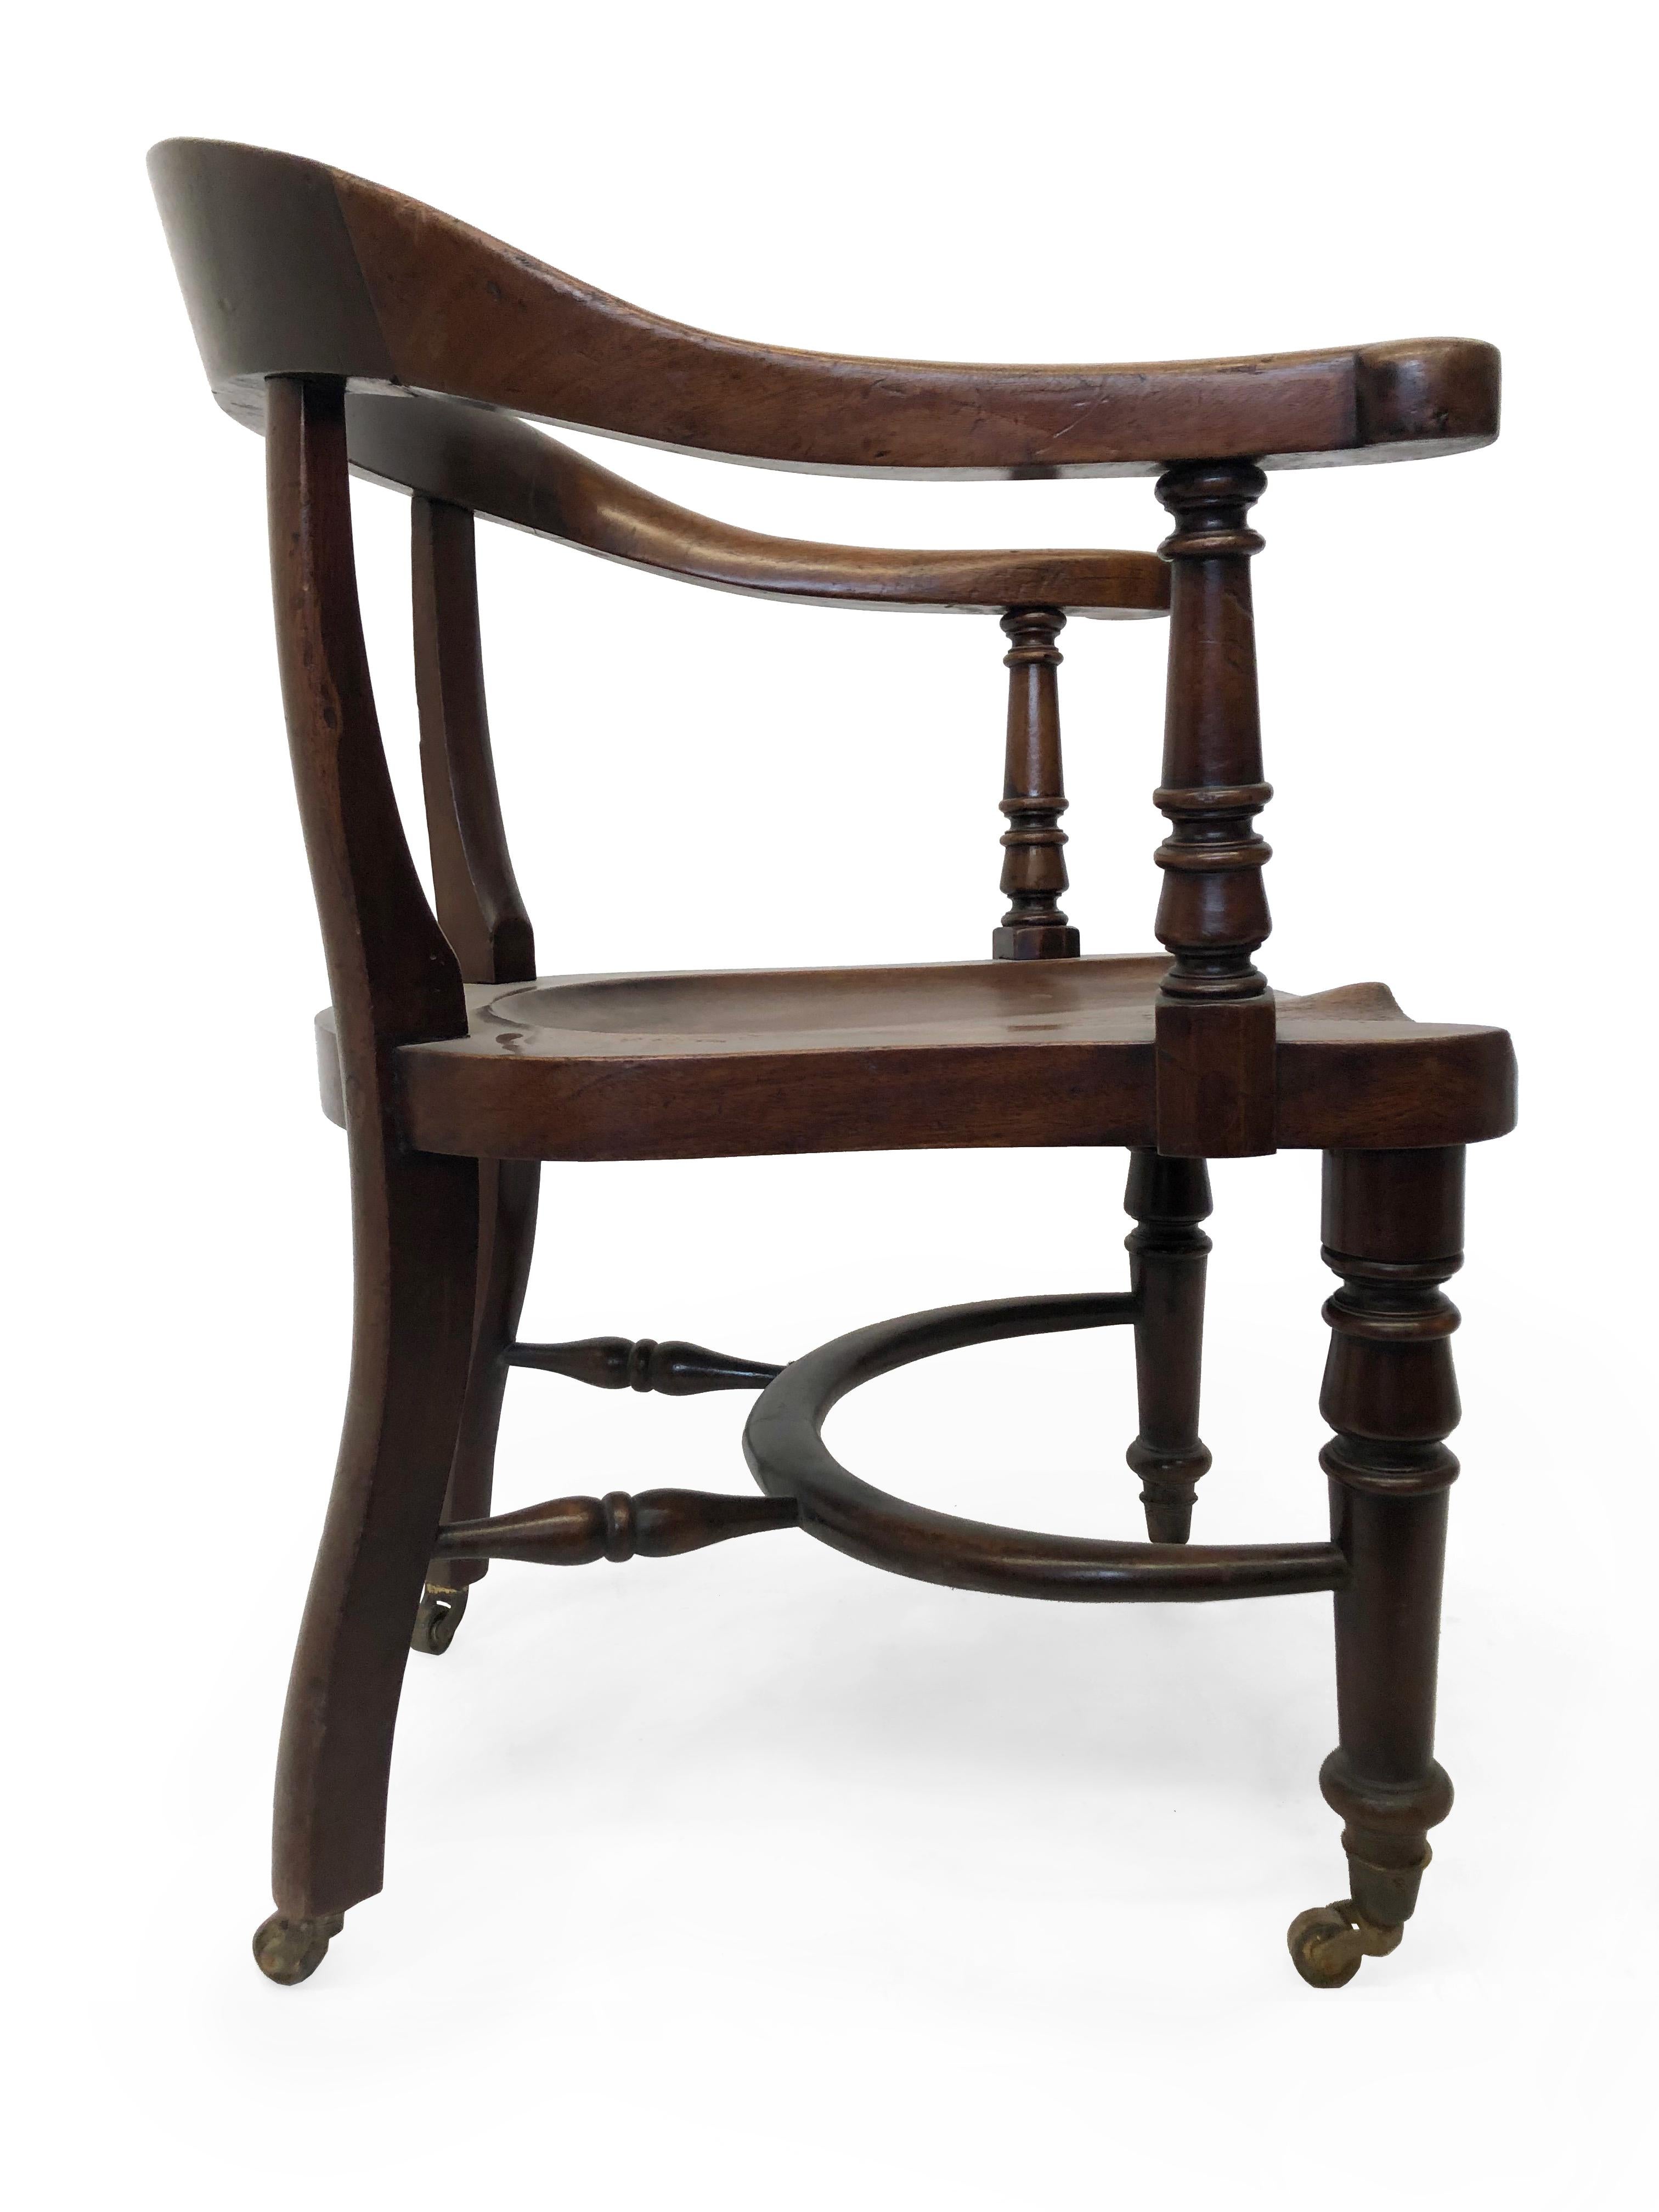 Solid wood captain's chair with molded seat and back. American, early 20th century. Brass casters. Simple early industrial design executed in walnut.

Property from esteemed interior designer Juan Montoya. Juan Montoya is one of the most acclaimed